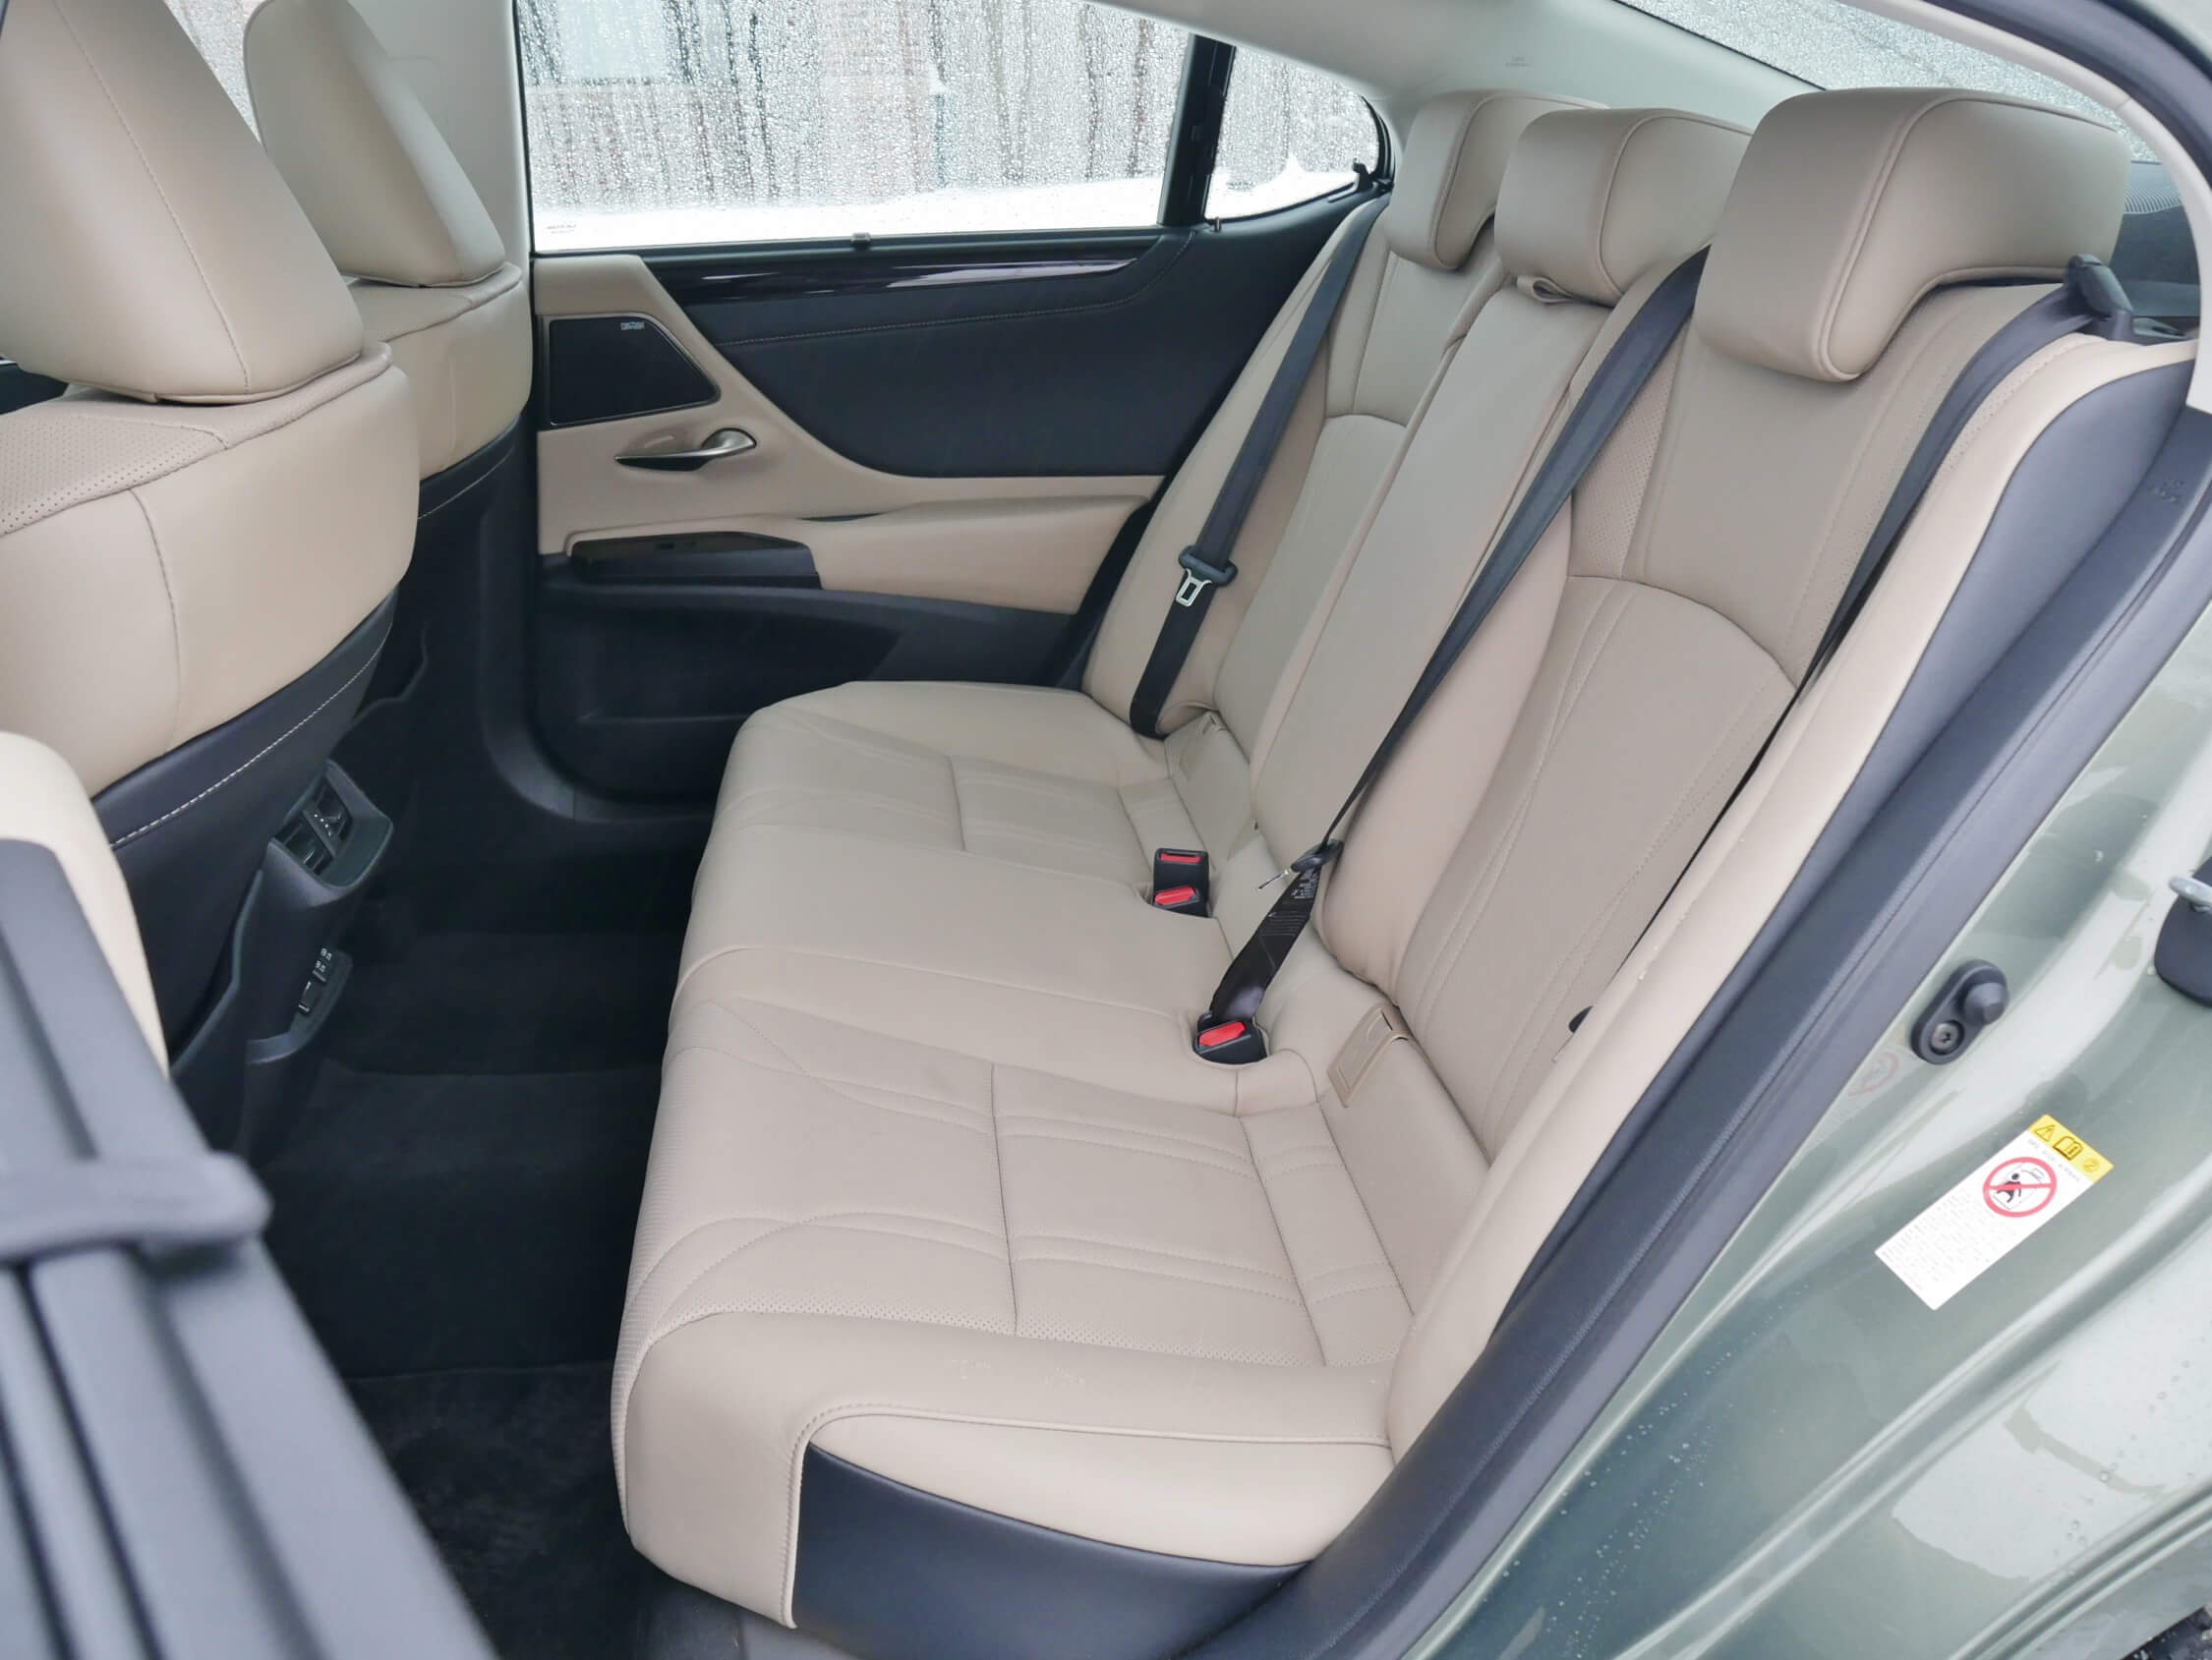 2019 Lexus ES 350: 39.2" of commodious adult rear seating